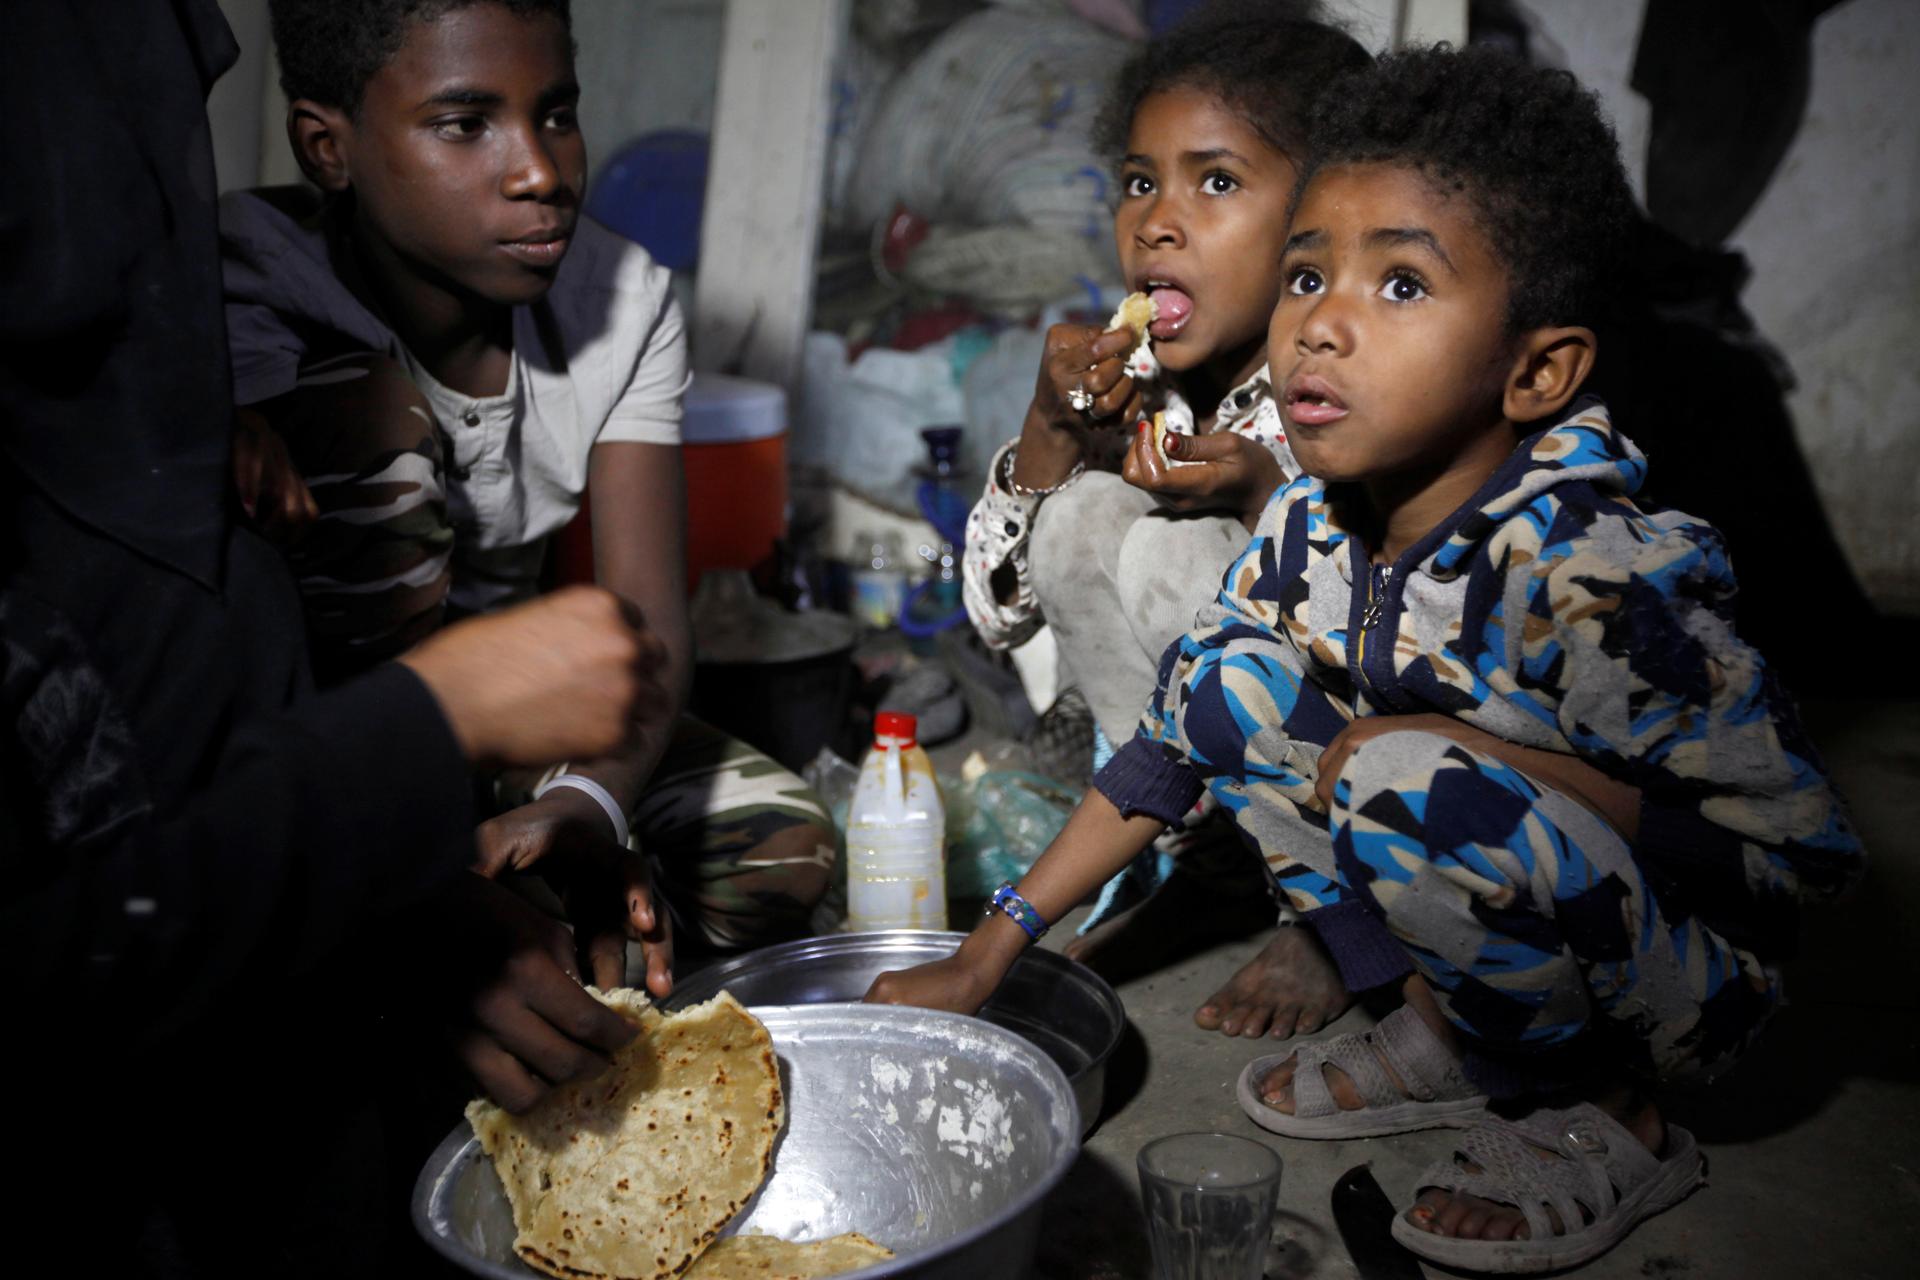 Children displaced from the Red Sea port city of Hodeidah have a meal in a shelter in Sanaa, Yemen November 1, 2018.